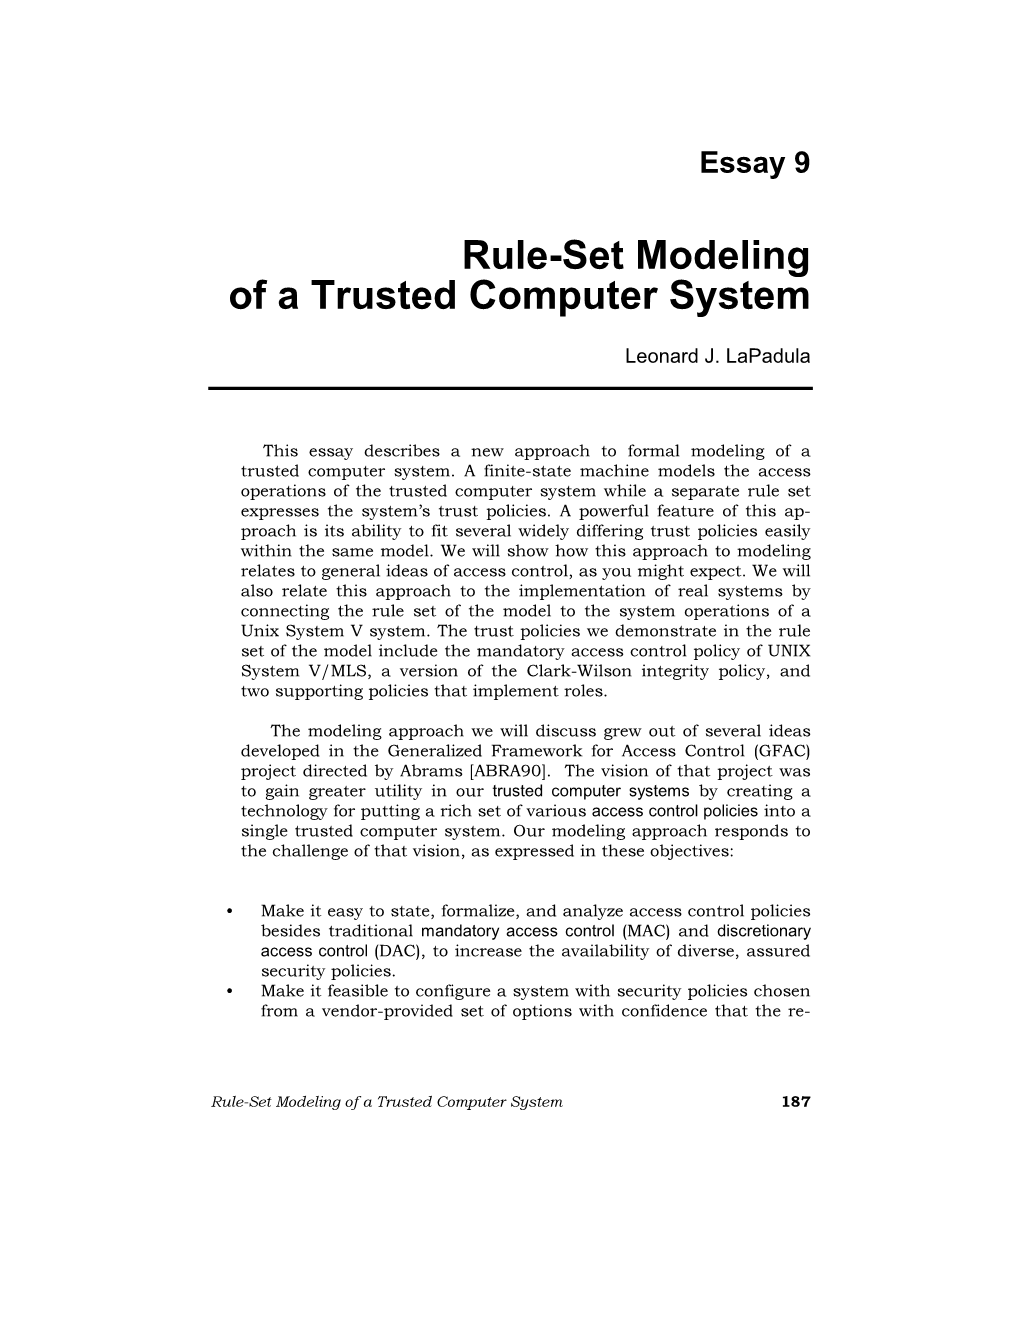 Rule-Set Modeling of a Trusted Computer System